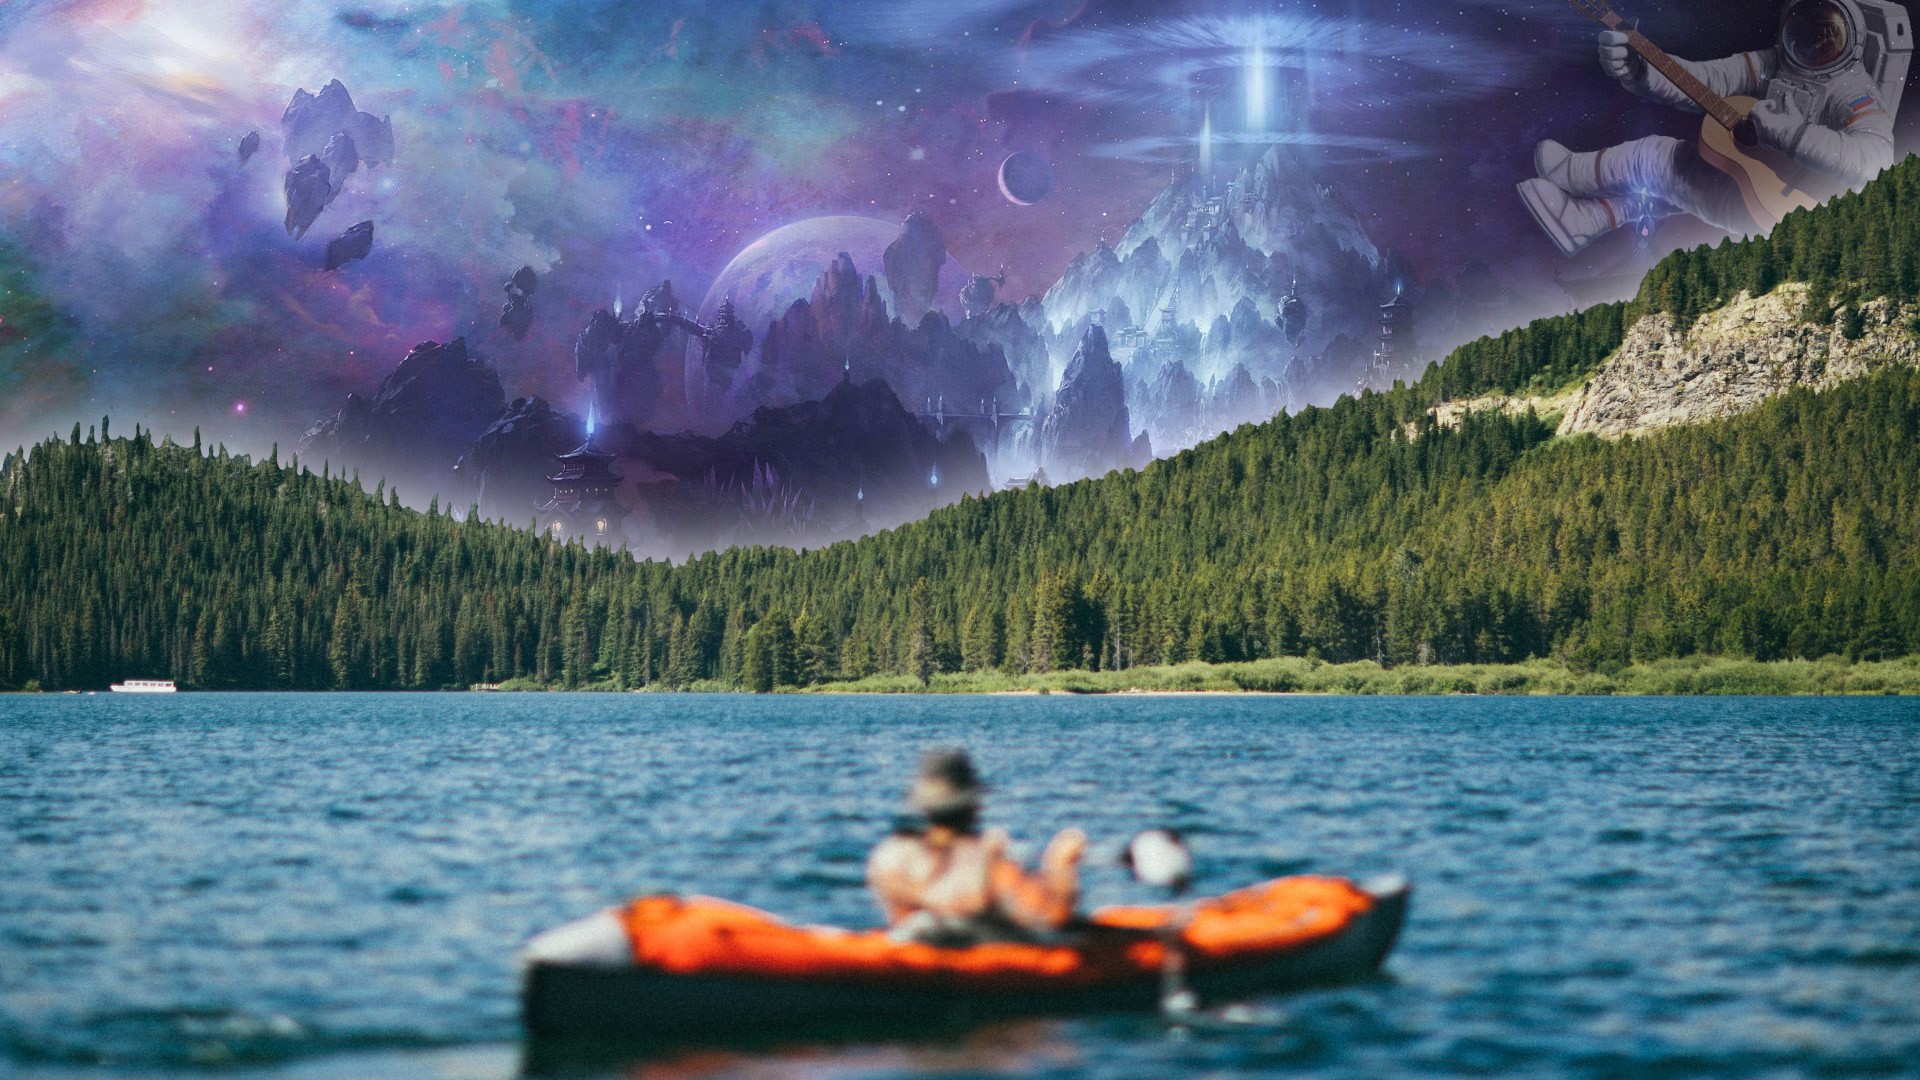 astronaut, Boat, Canoes, Water, Lake, Forest, Photoshop, Sky, Guitar Wallpaper